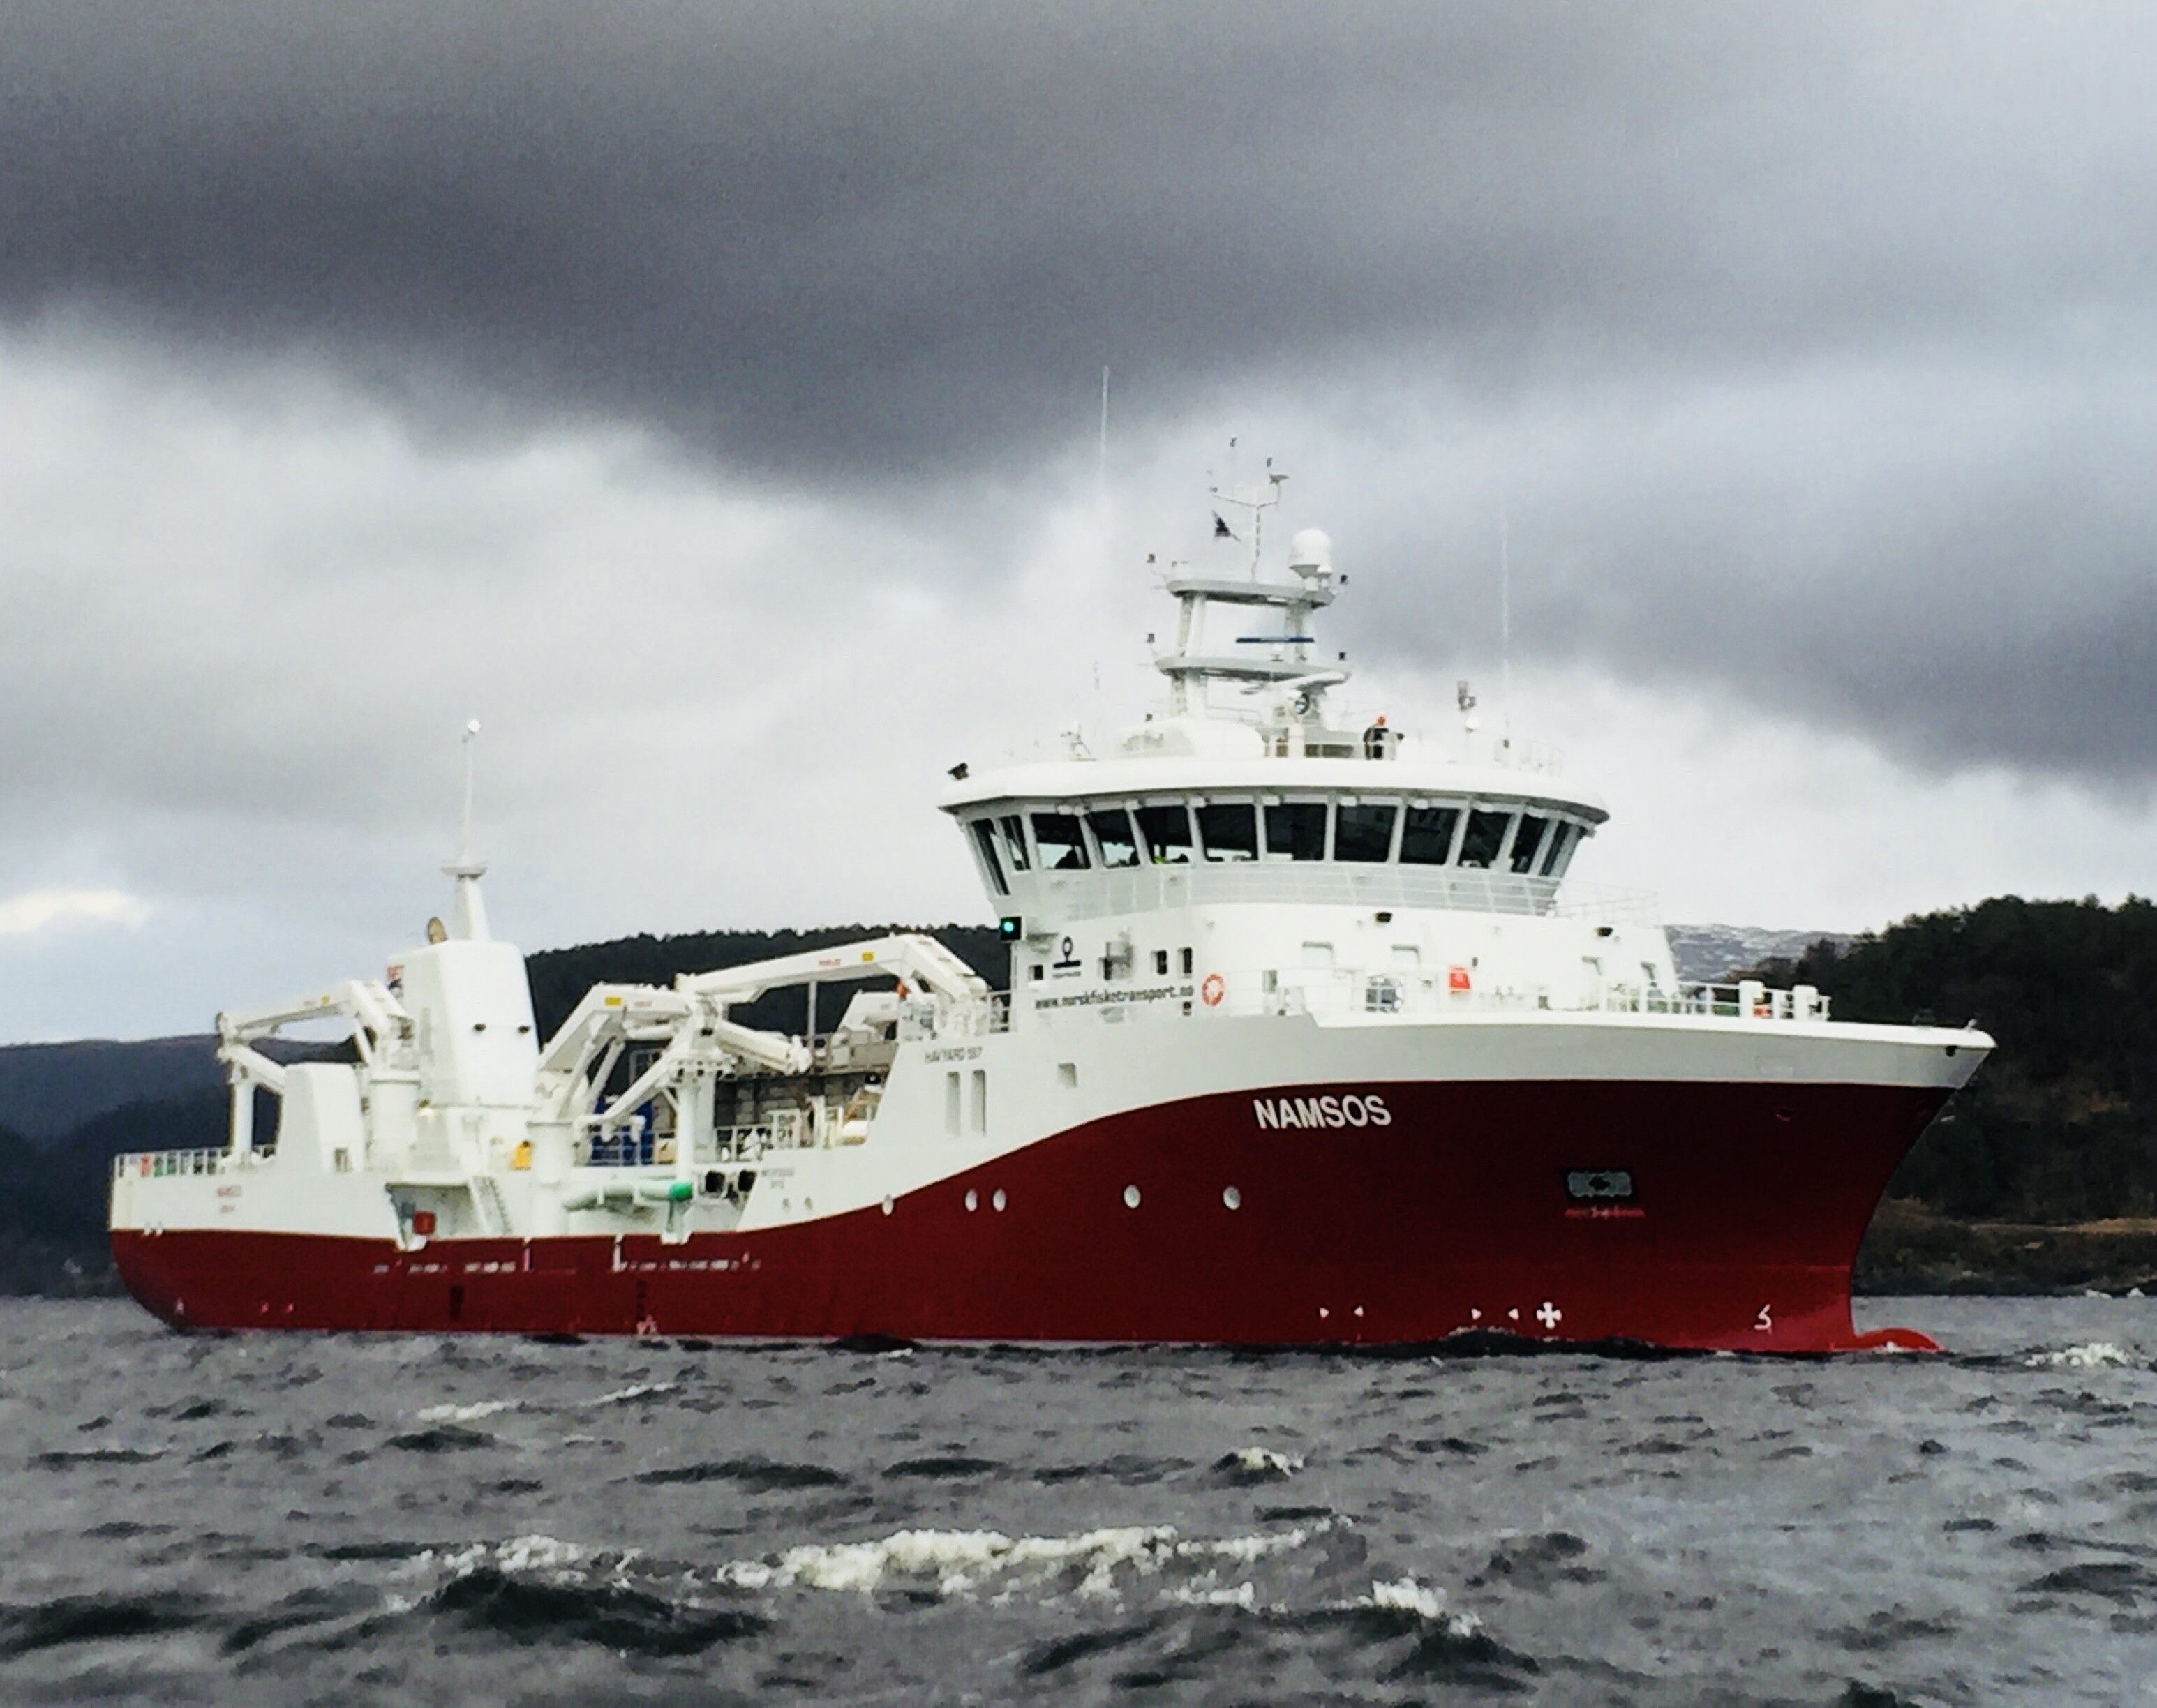 The approval follows 45 weeks of testing on board the Norsk Fisketransport boat MS Namsos.